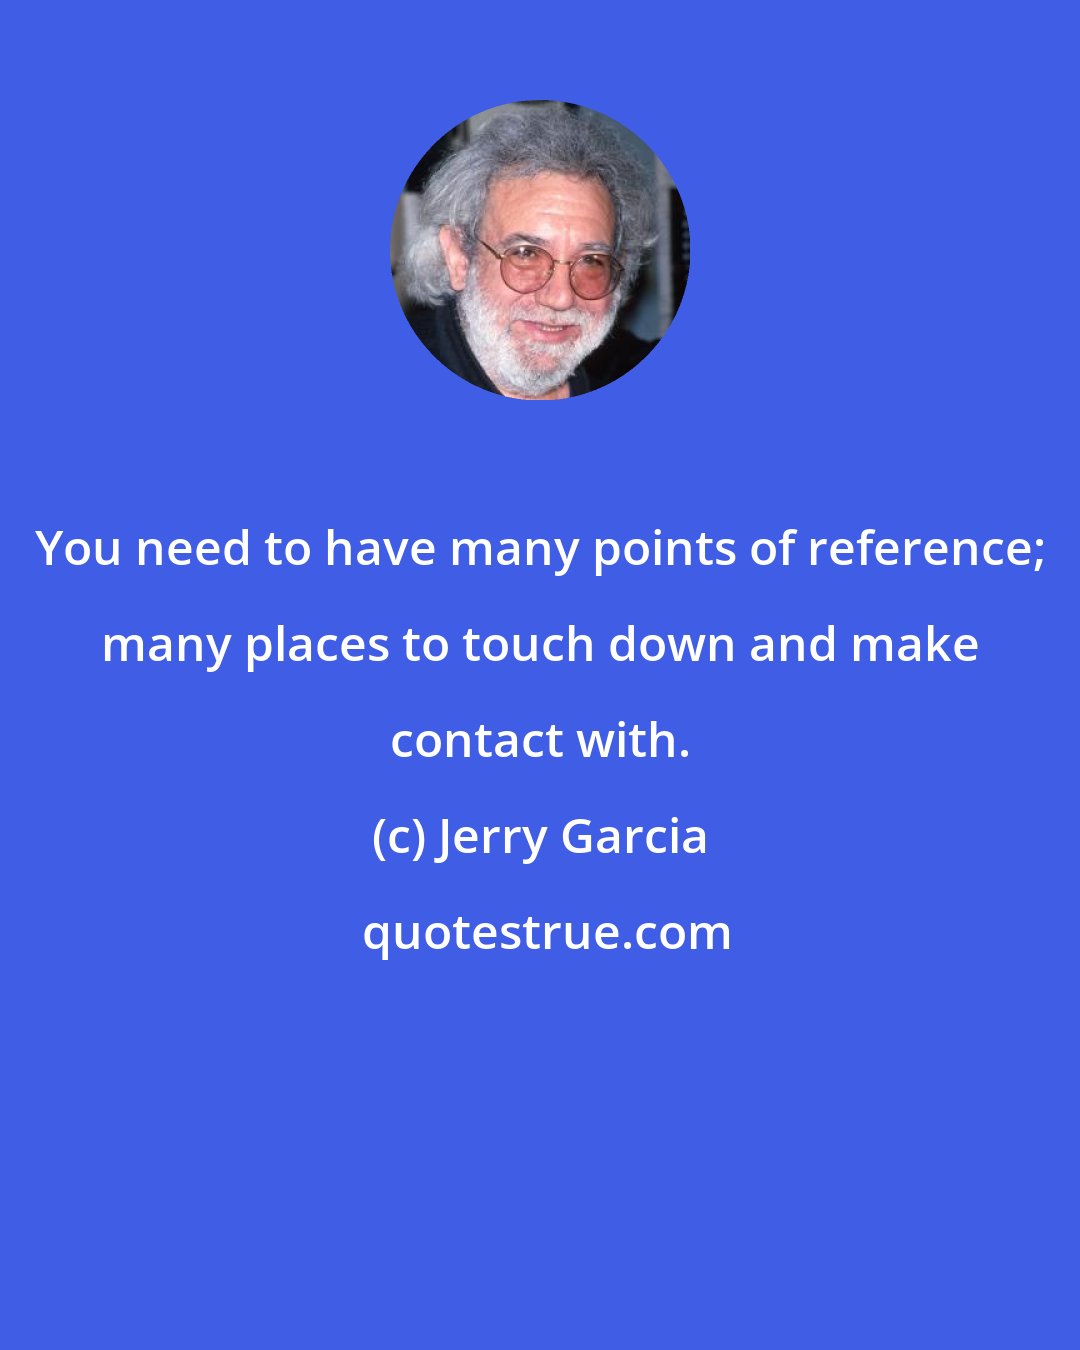 Jerry Garcia: You need to have many points of reference; many places to touch down and make contact with.